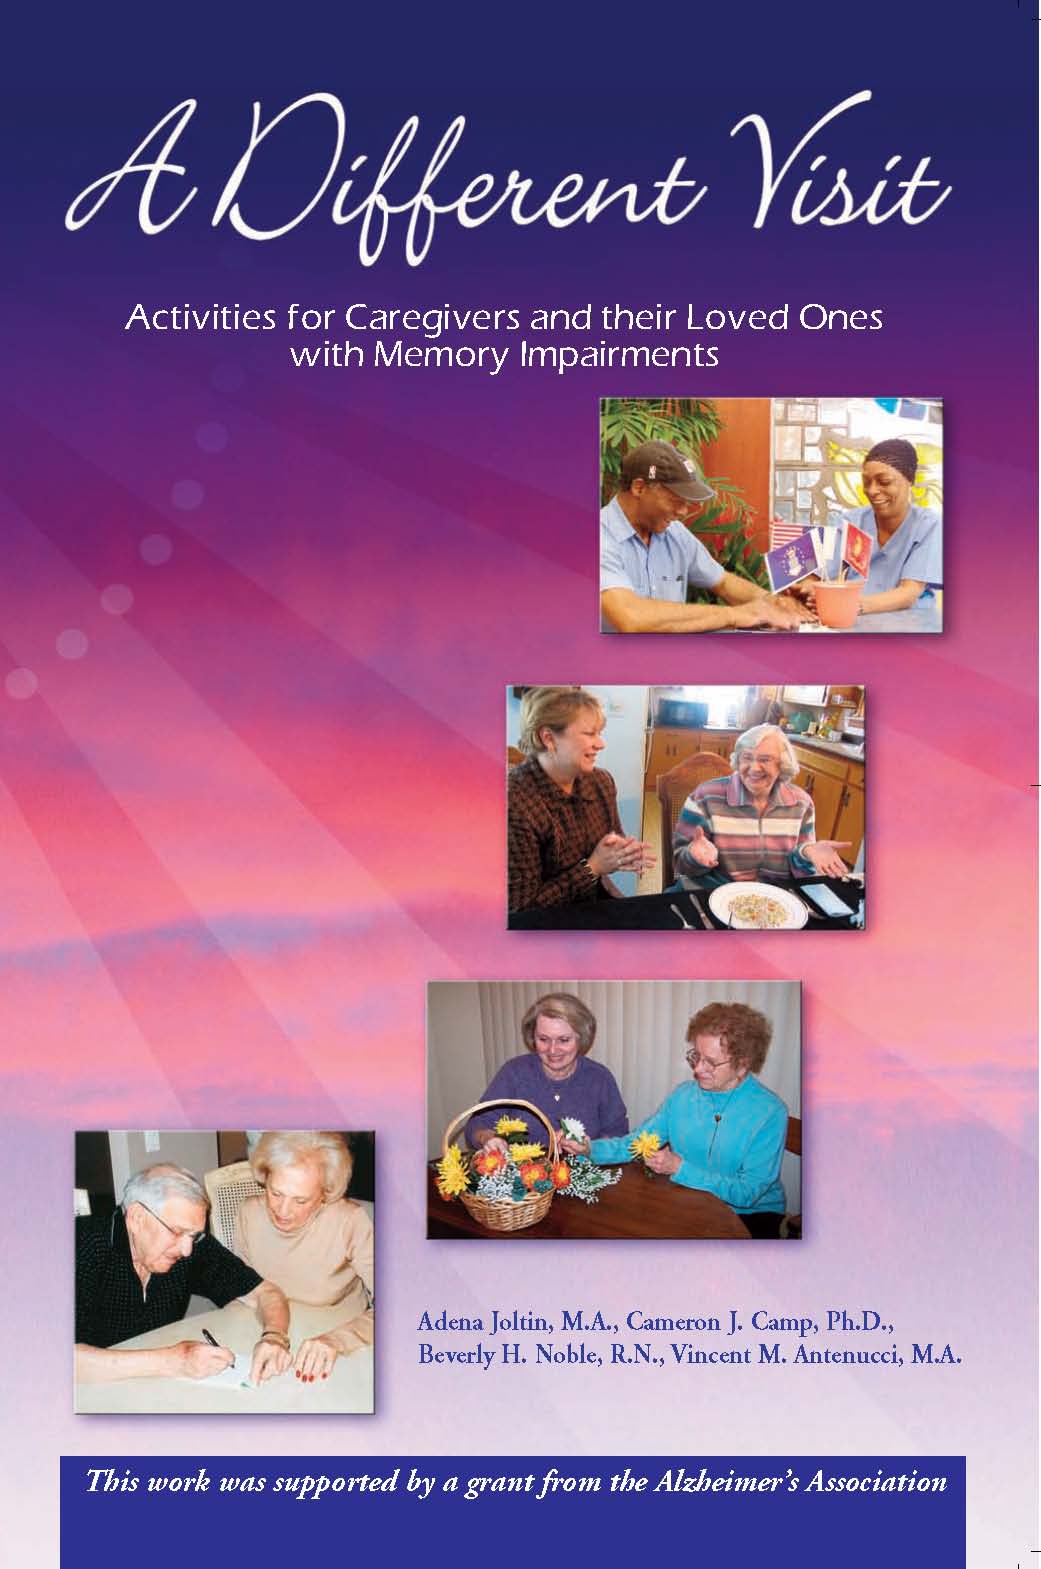 Joltin, A., Camp, C. J., Noble, B. H., & Antenucci, V. M. (2012). A different visit: Activities for caregivers and their loved ones with memory impairments.